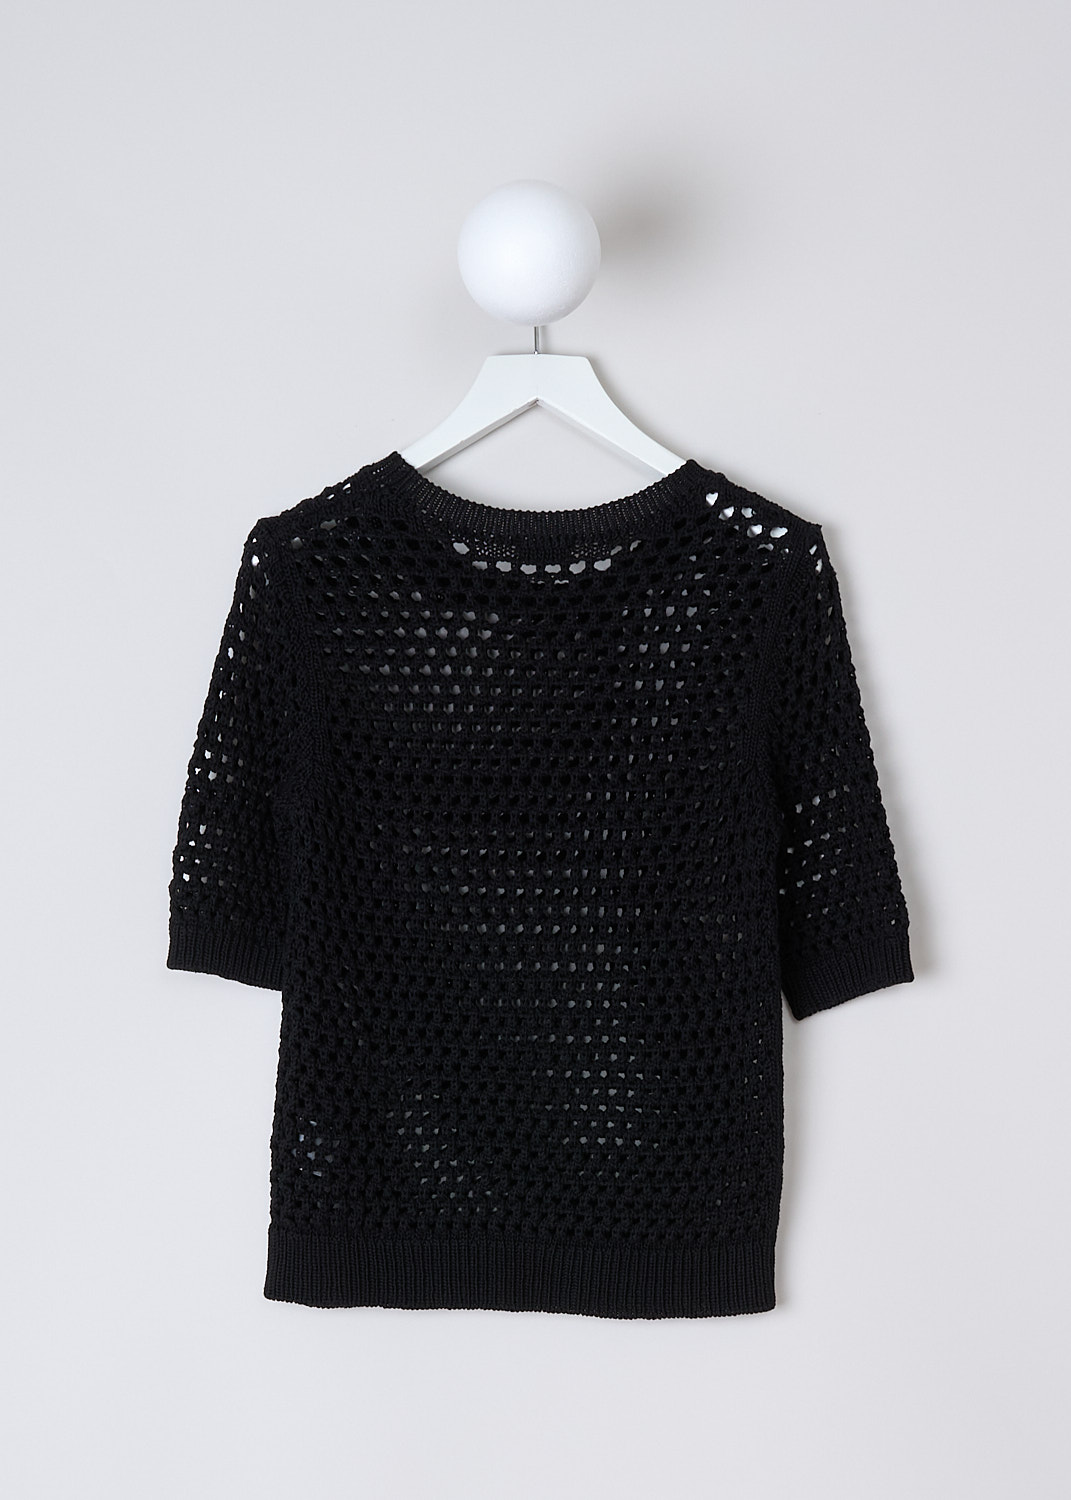 DRIES VAN NOTEN, BLACK OPEN-KNIT TILIA SWEATER, 
TILIA_6713_WK_SWEATER_BLACK, Black, Back, This black open-knit Tilia sweater has a round neckline. The top has three-quarter sleeves with ribbed cuffs. The hemline is also ribbed. 
